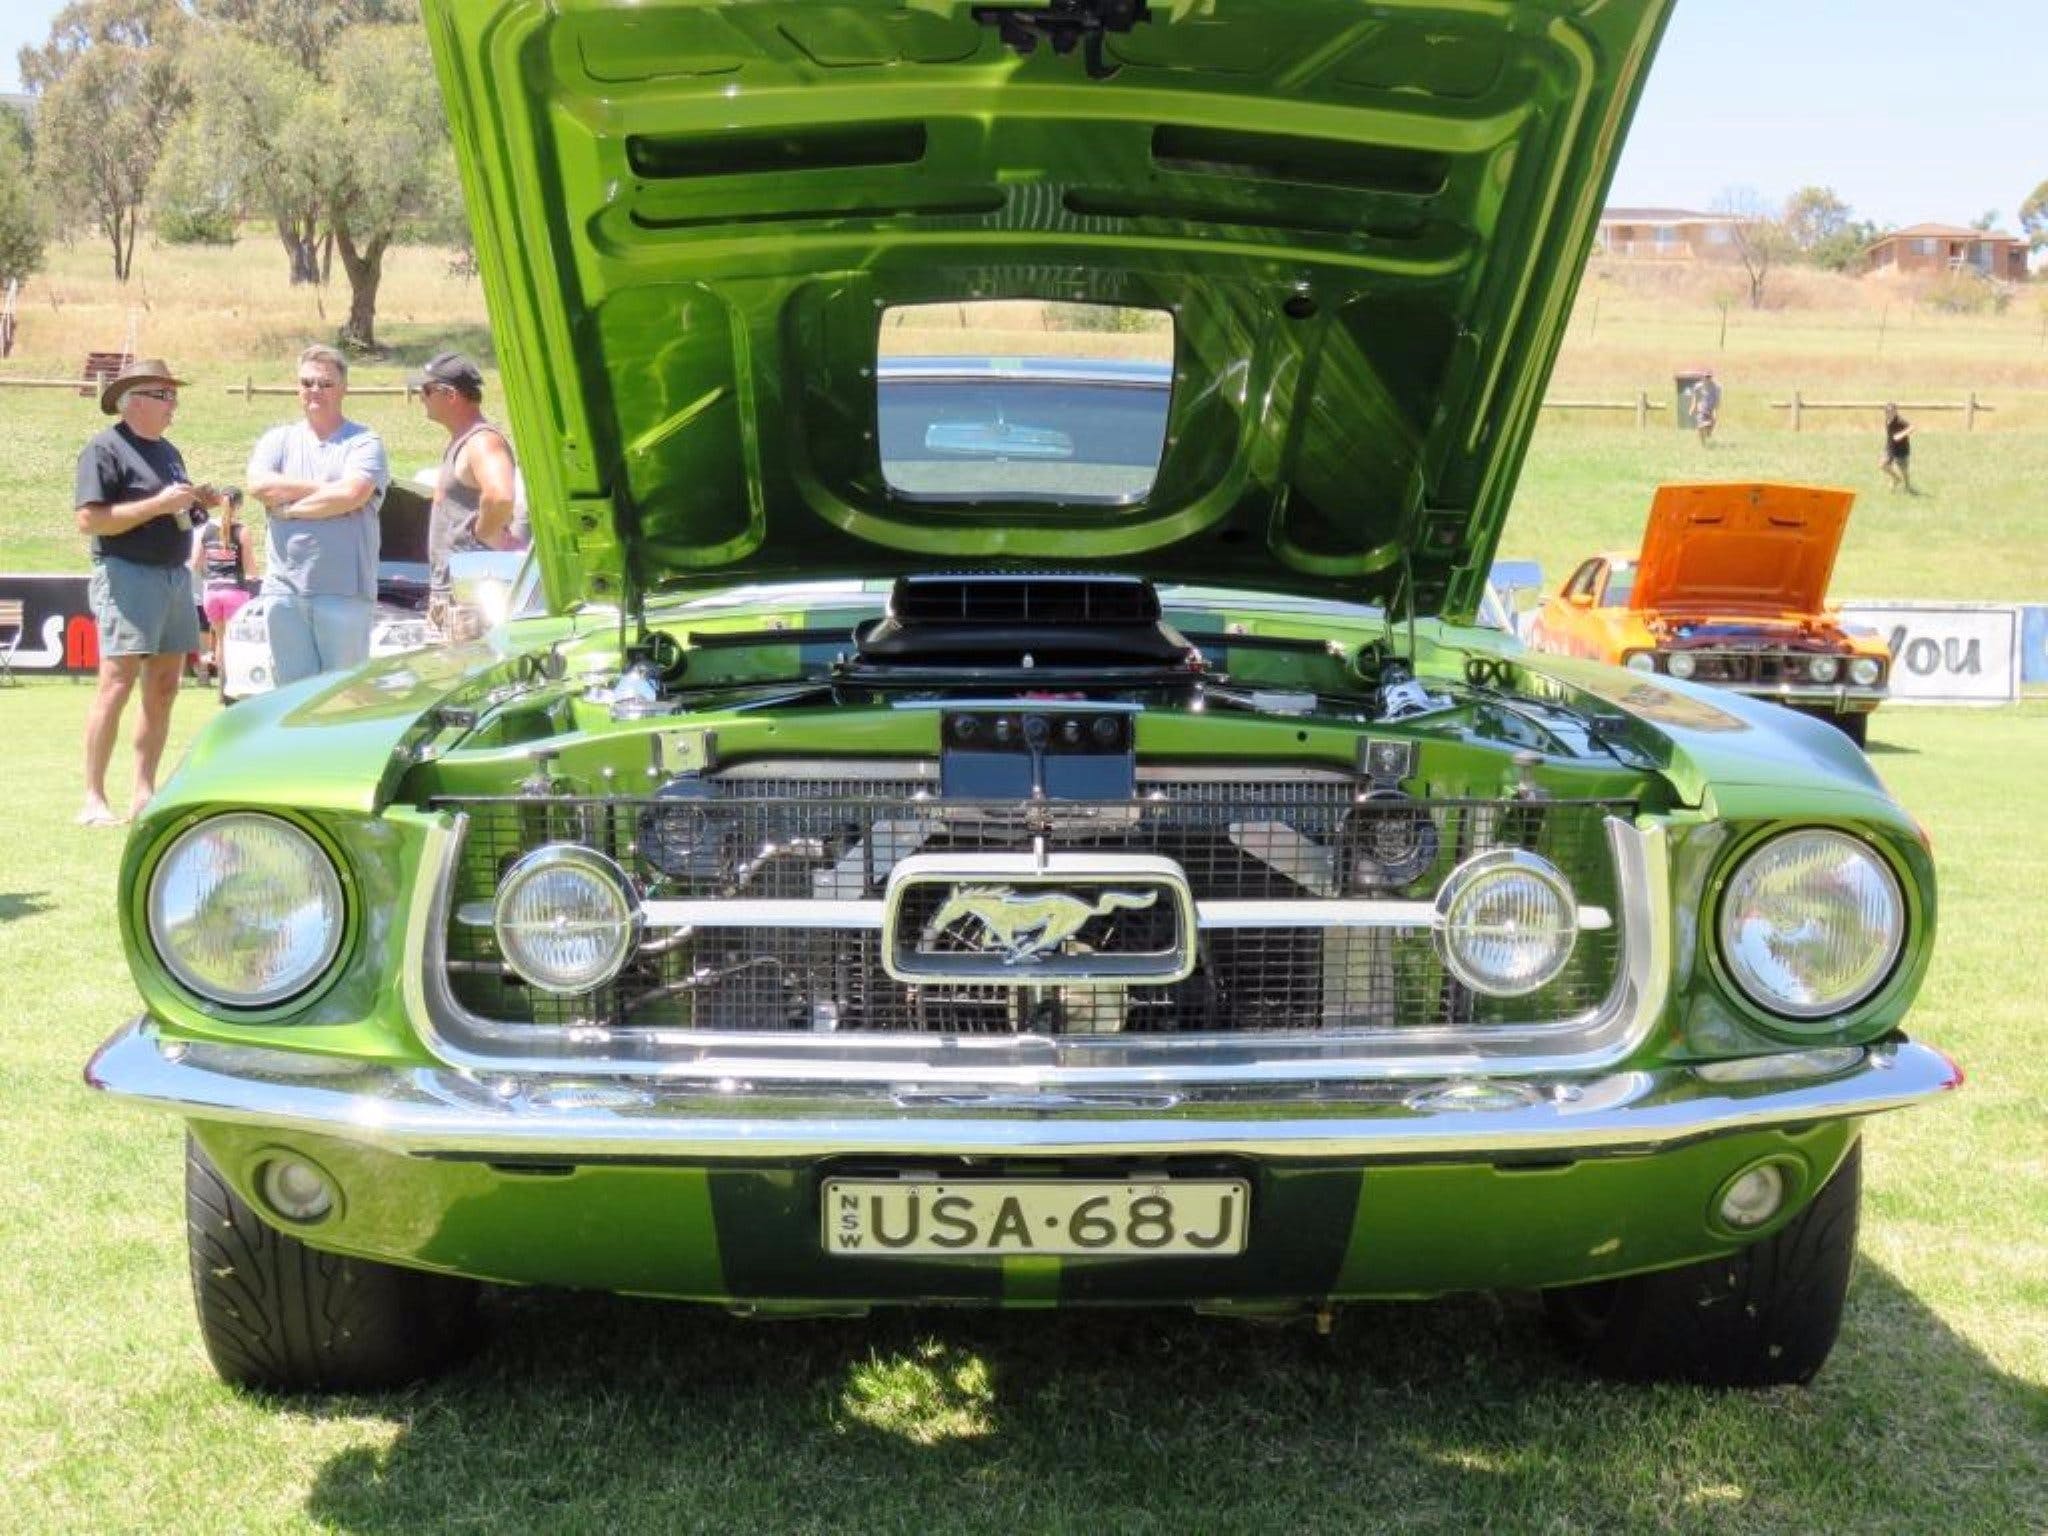 Central West Car Club Charity Show and Shine - Tourism Canberra